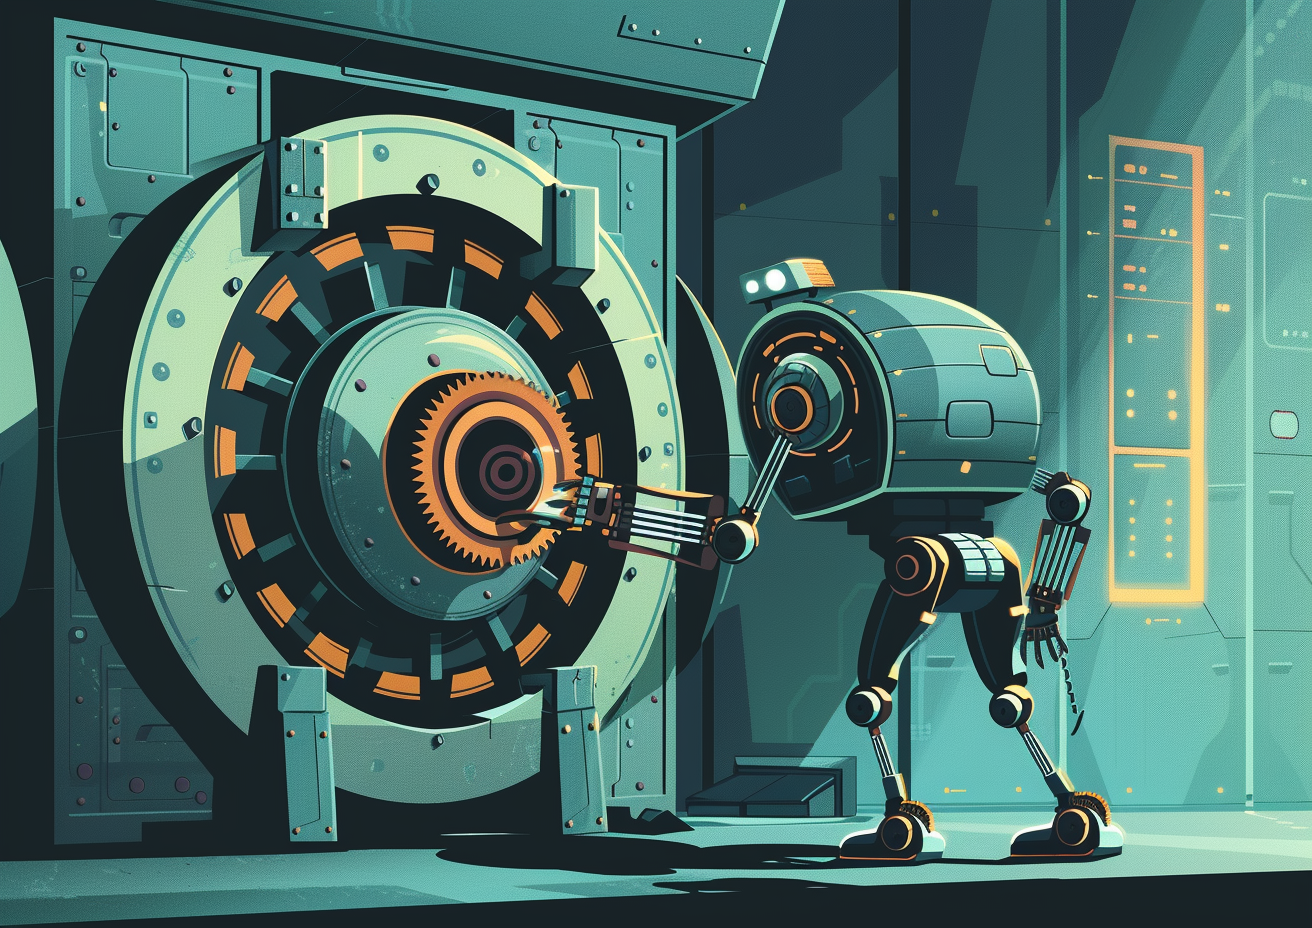 A lumbering robot locks a bank vault full of private information